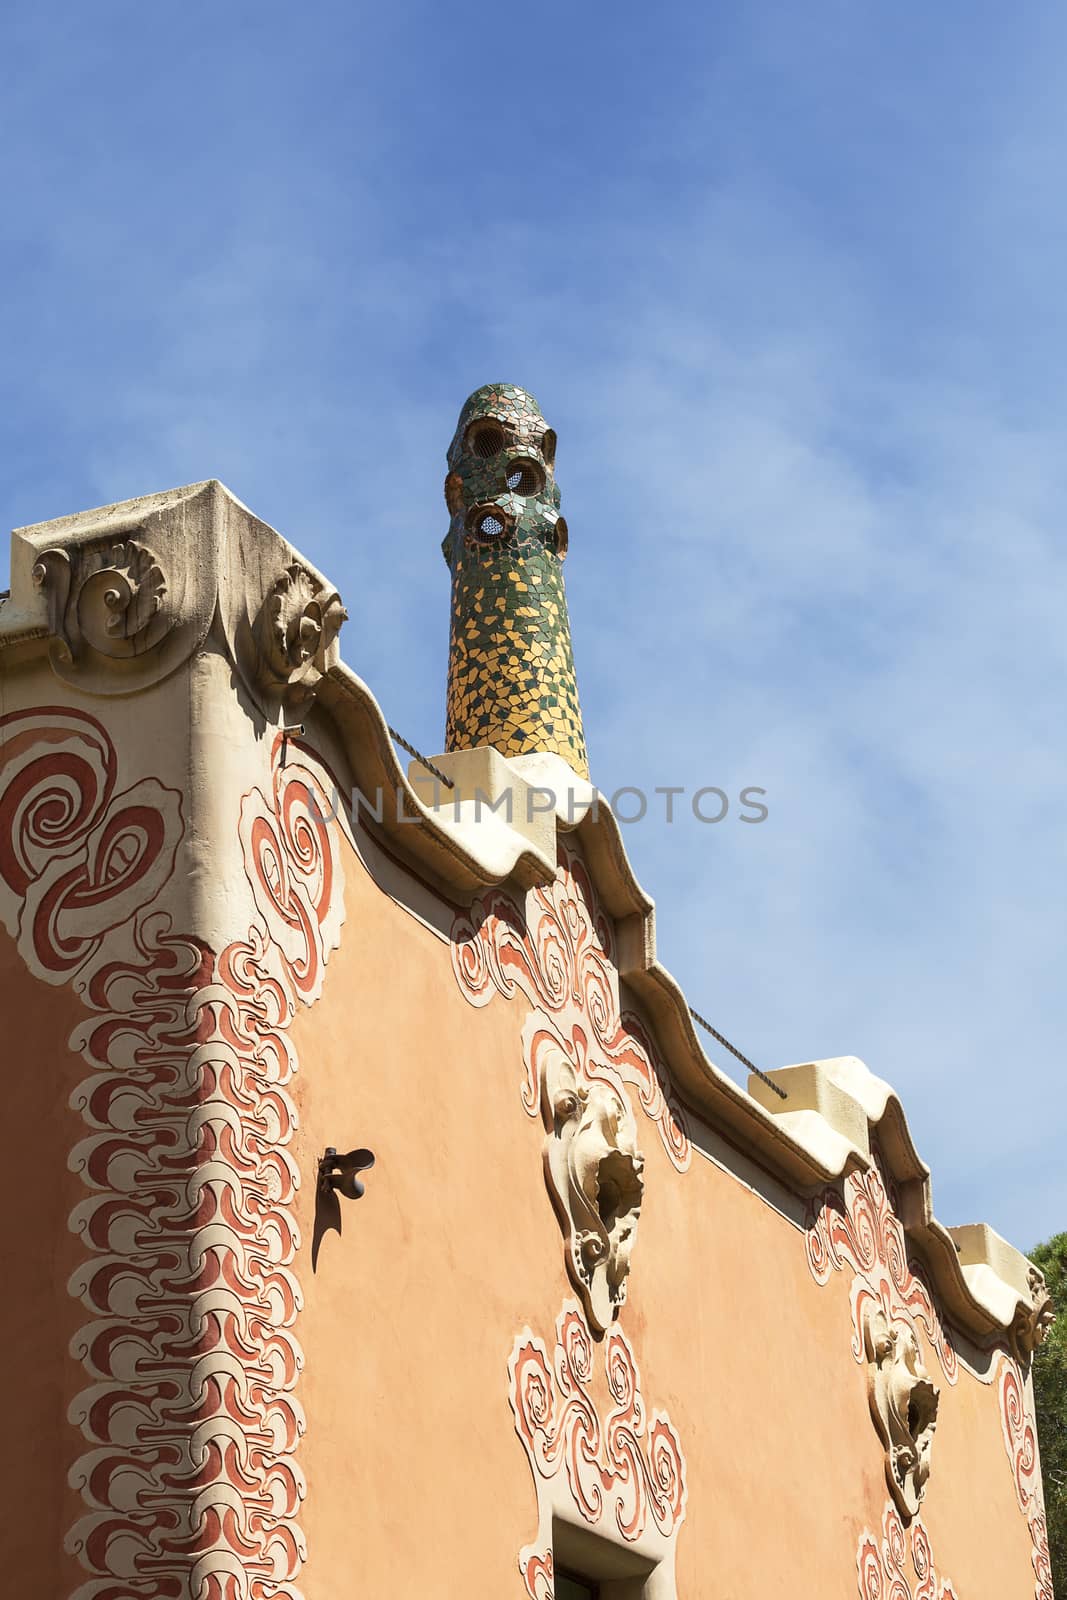 Decorative facade  on Gaudi House Museum with mosaic chimney, Barcelona, Spain by mychadre77